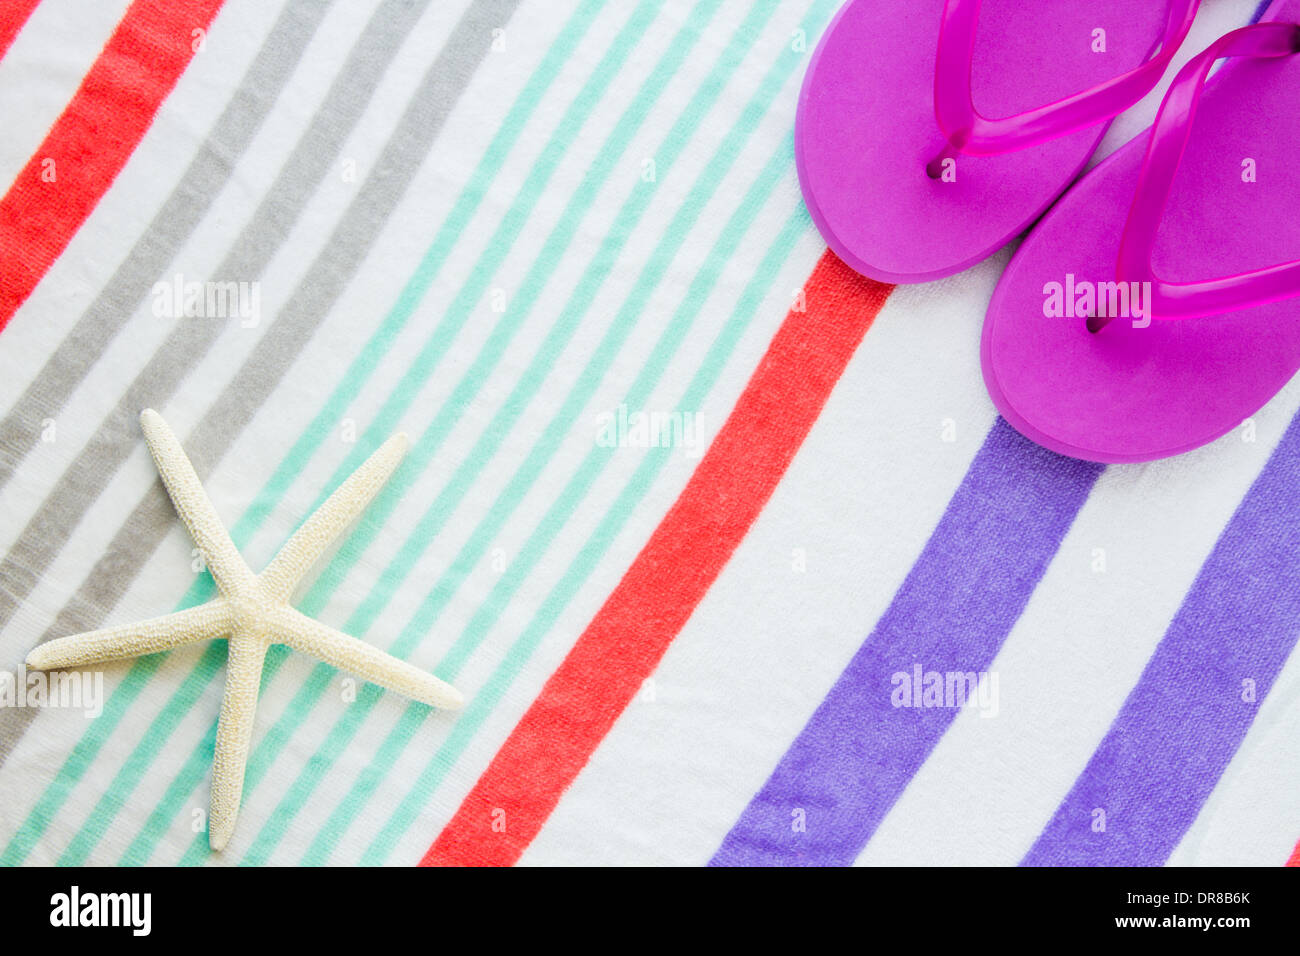 Beach scene with purple flip flops and a starfish on a striped beach towel. Stock Photo